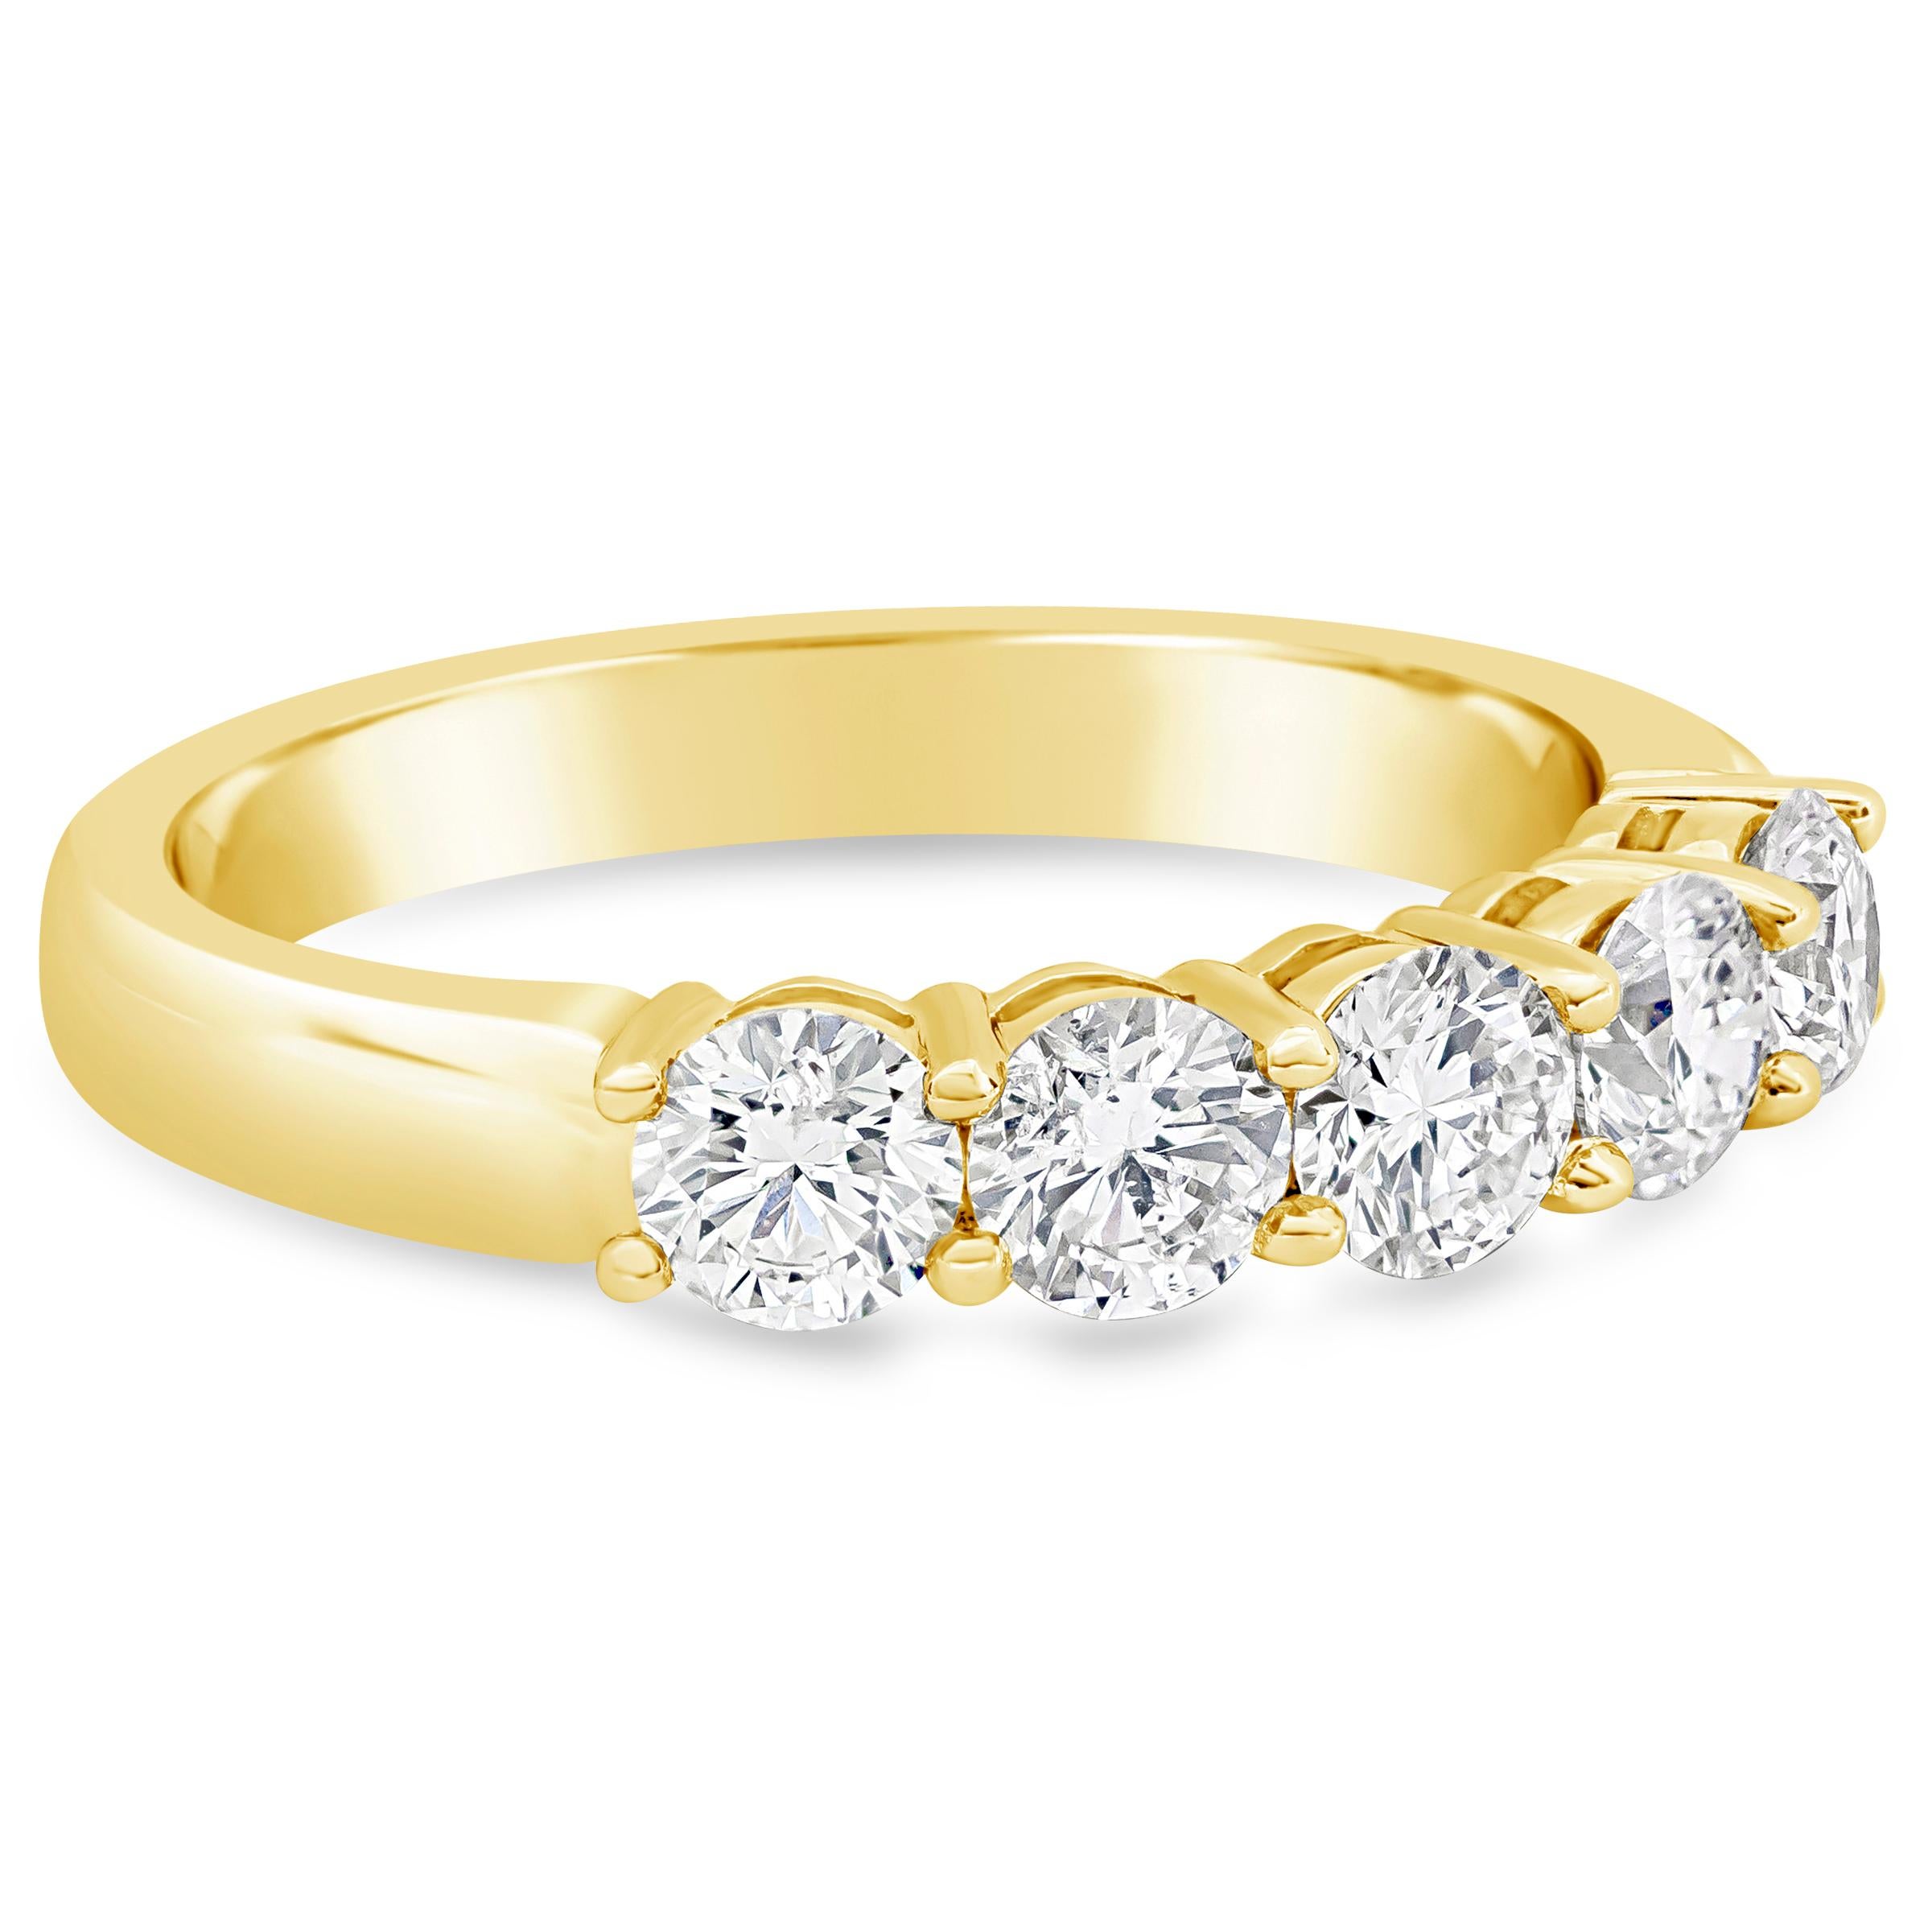 A design that surpasses time because of its simplicity and brilliance. Five sparkling diamonds weighing 1.19 carats total, E Color and SI in Clarity. Set in a band with angular edges for a sleek and comfortable fit in a shared-prong. Made with 18K